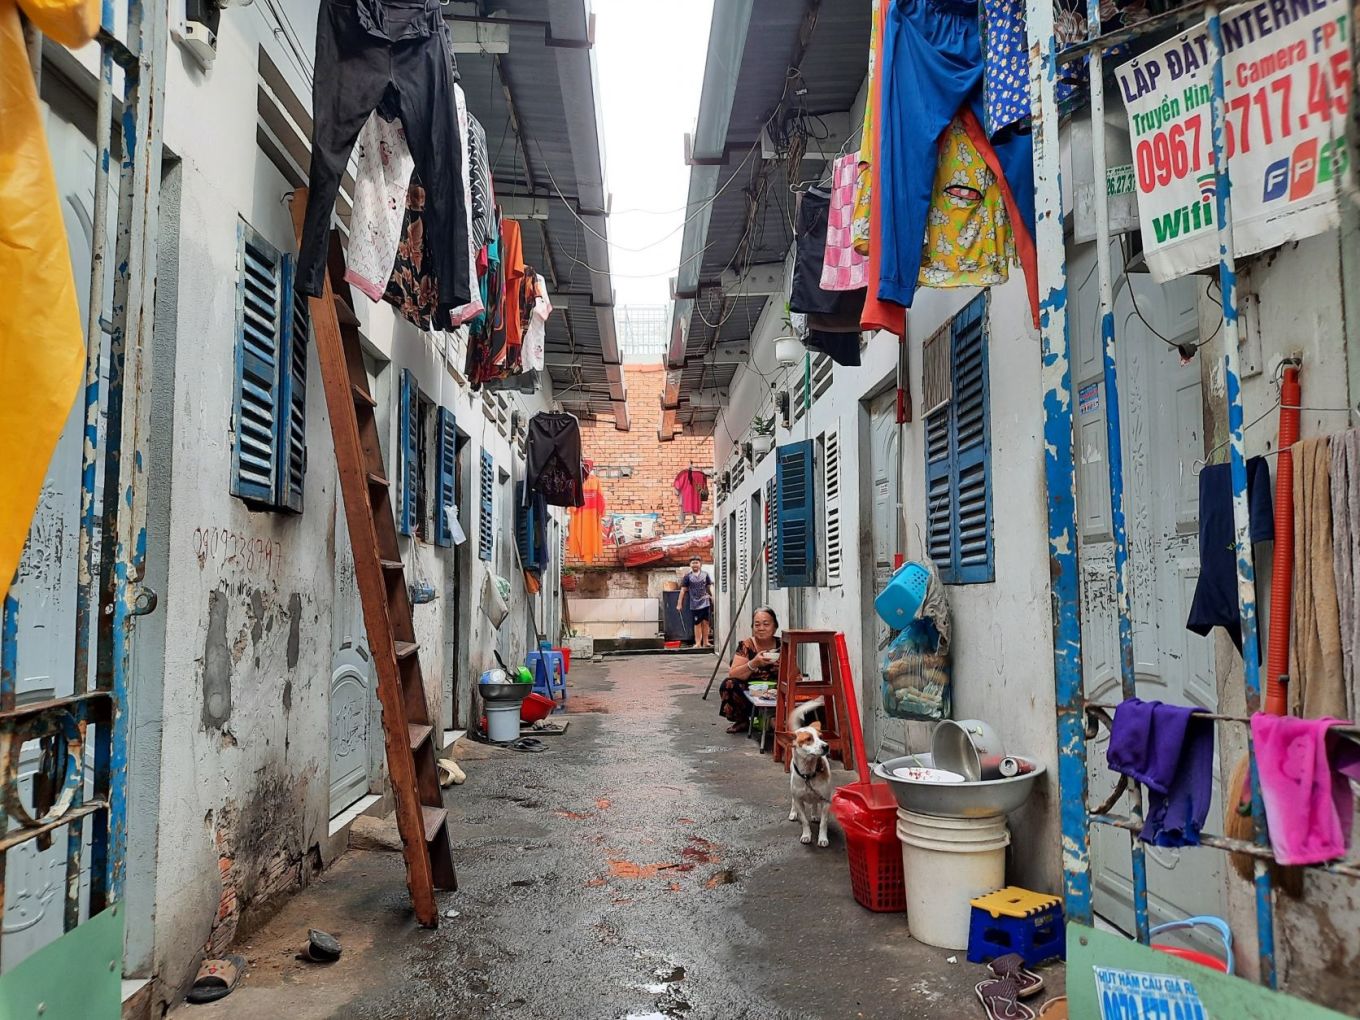 Workers’ houses in Linh Xuan ward, Thu Duc, HCMC. Photo by VnExpress/Le Tuyet